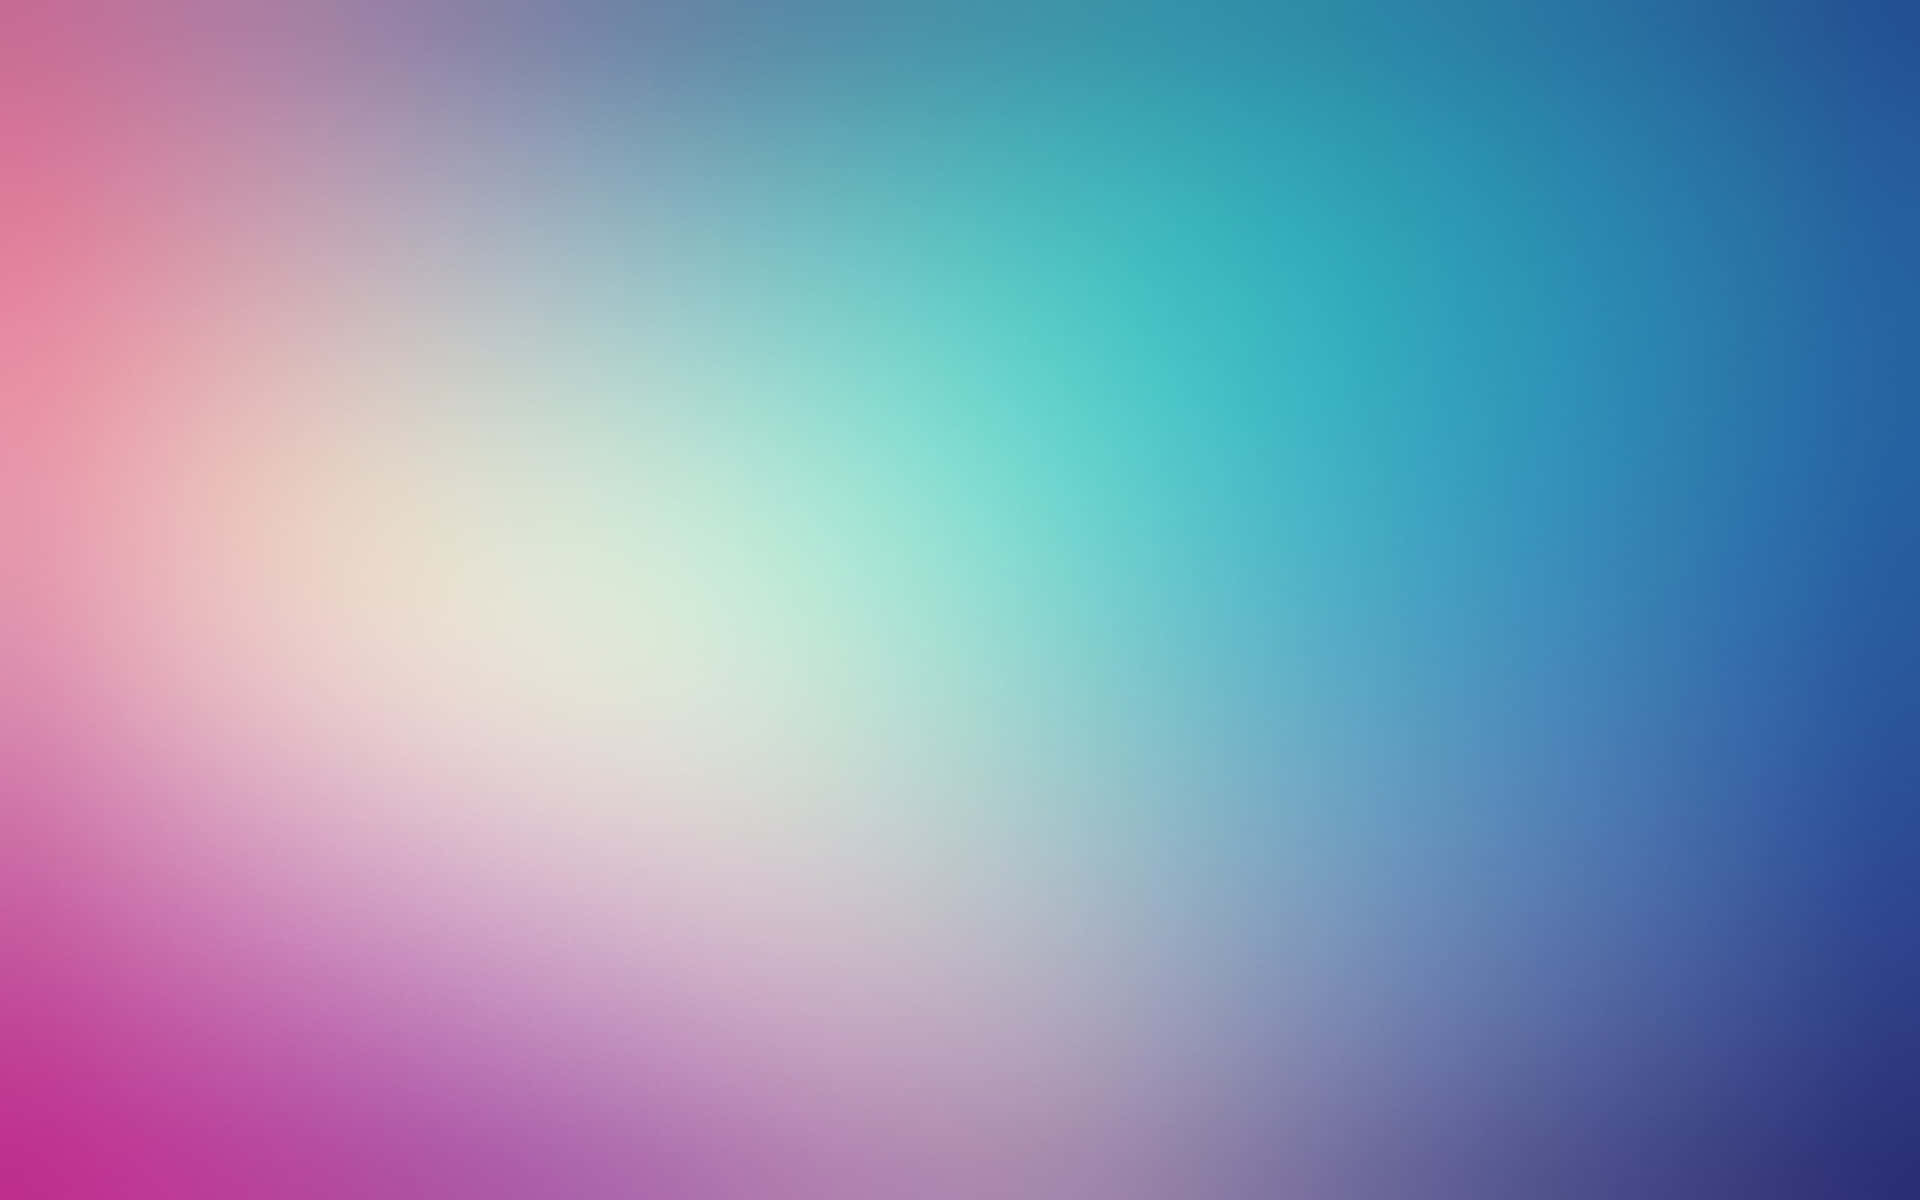 a blurred background with blue and pink colors